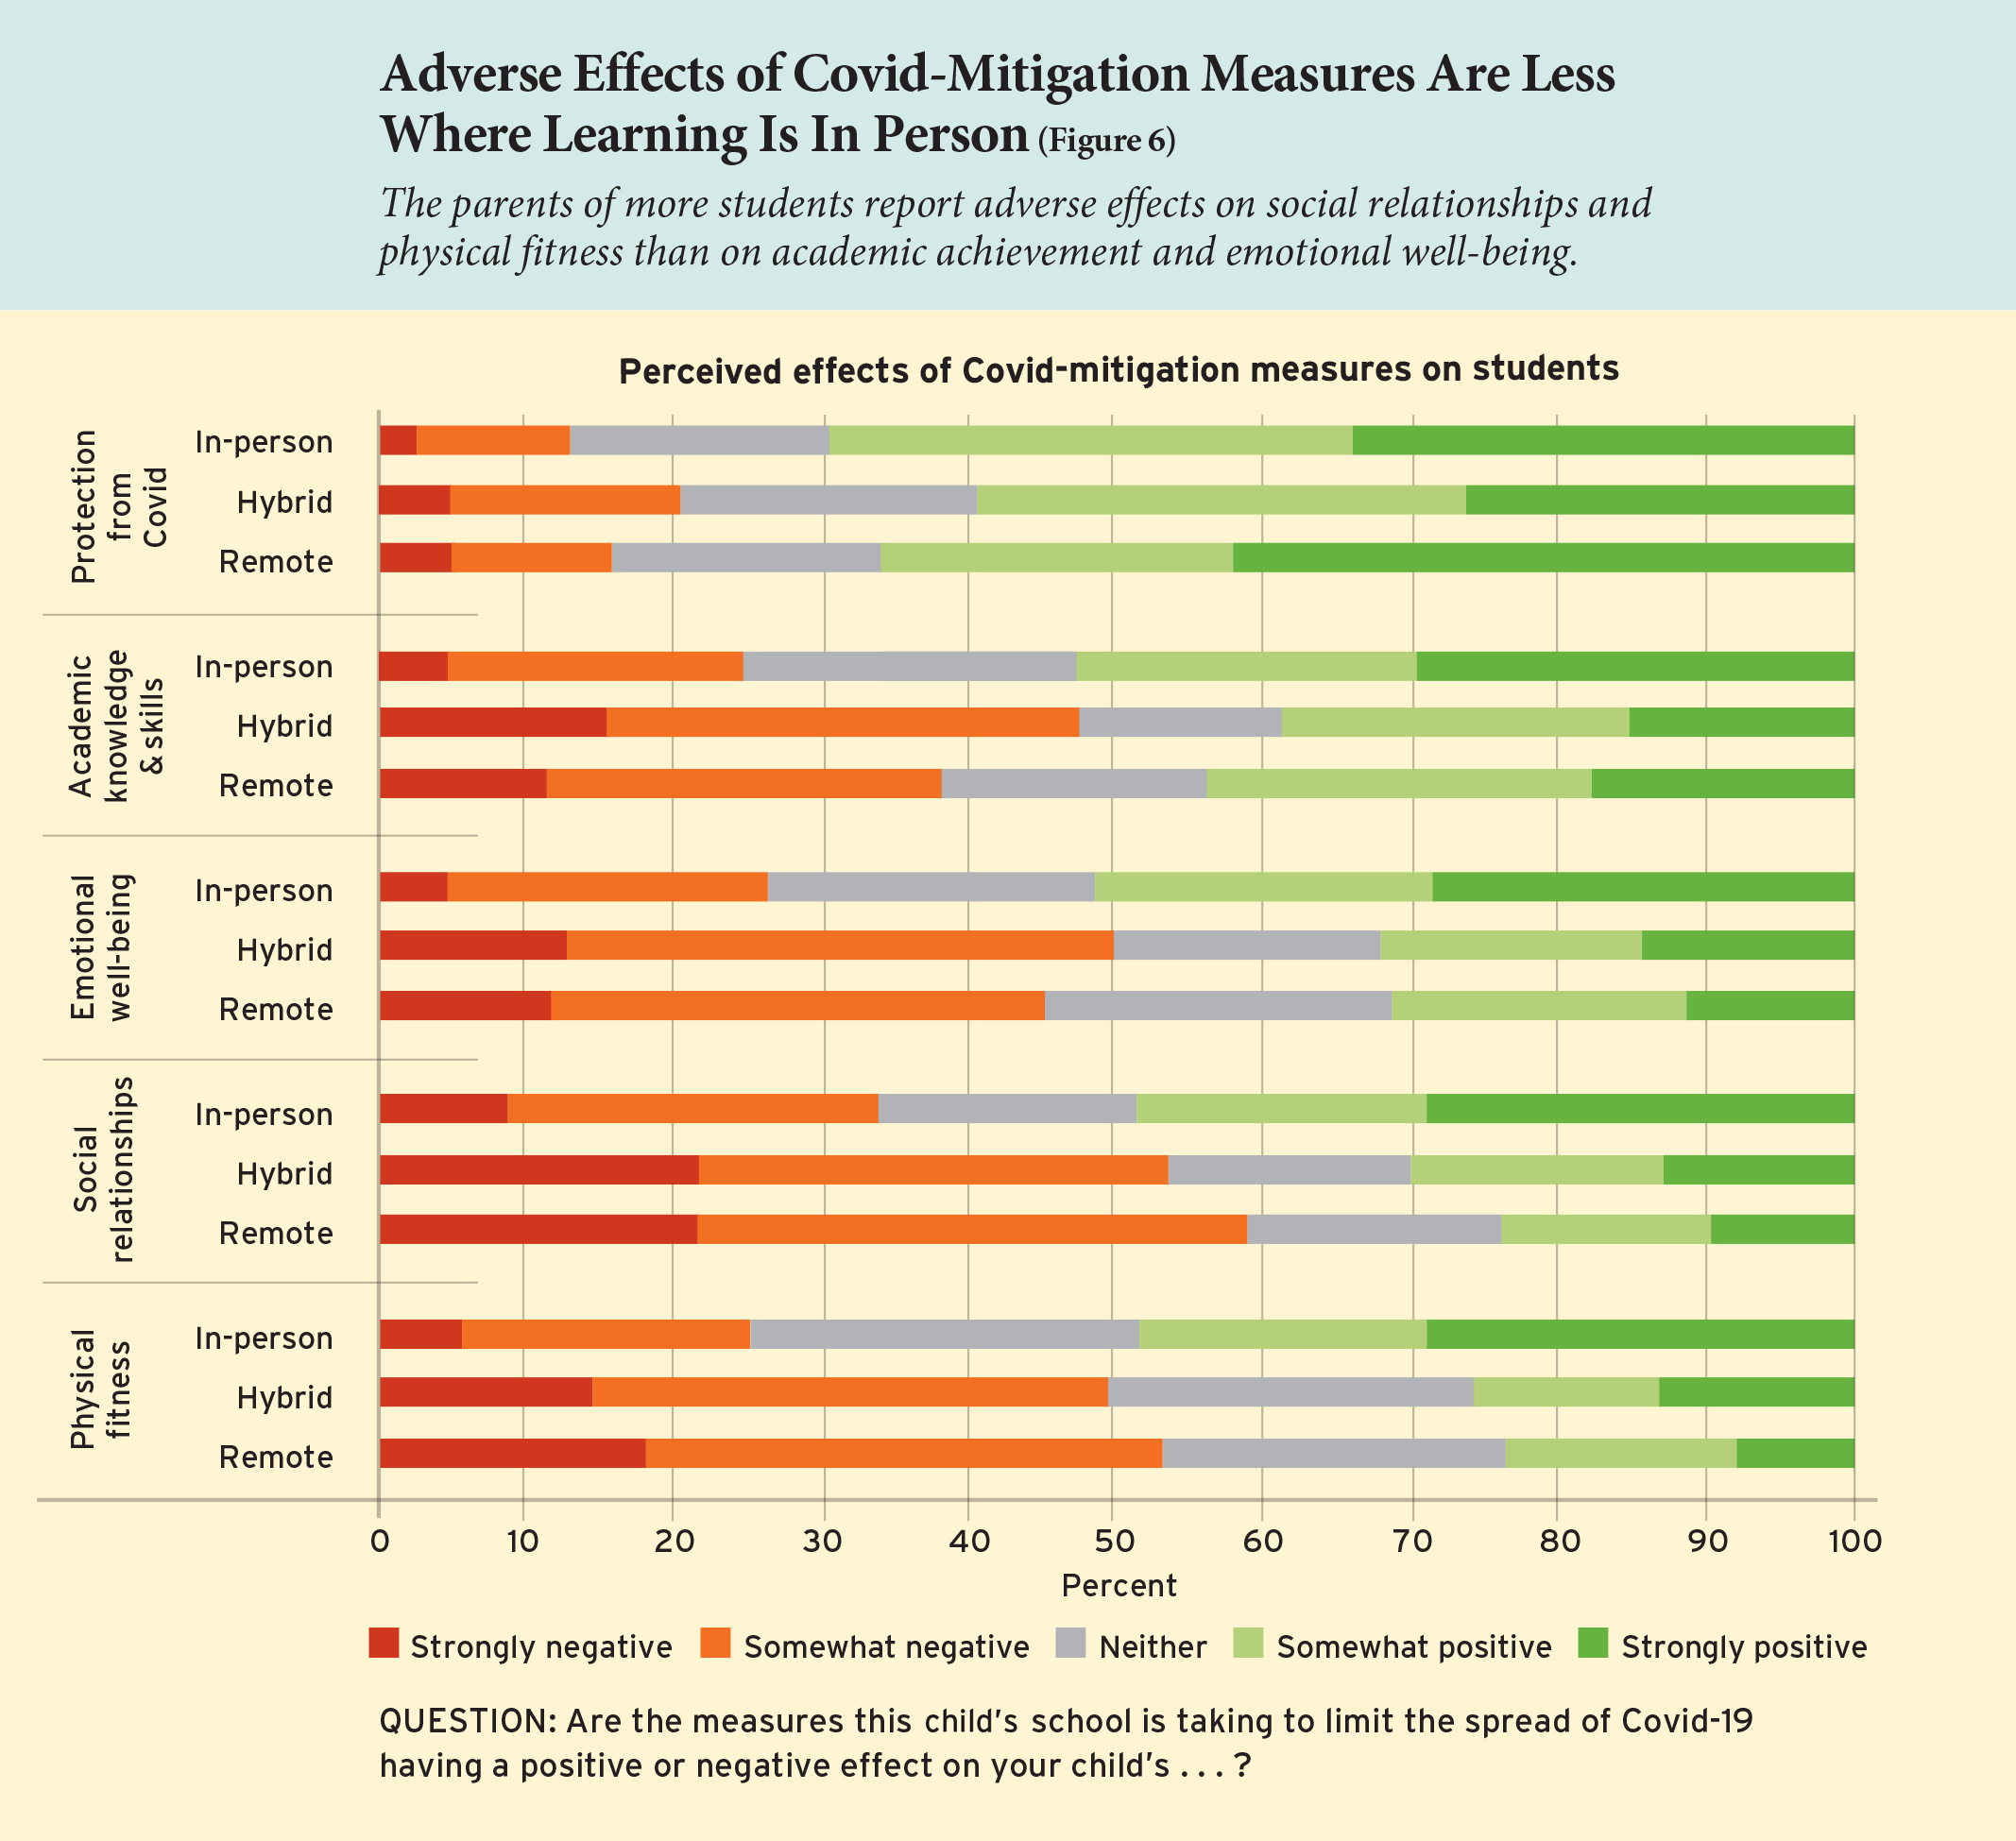 Adverse Effects of Covid-Mitigation Measures Are Less Where Learning Is In Person (Figure 6)